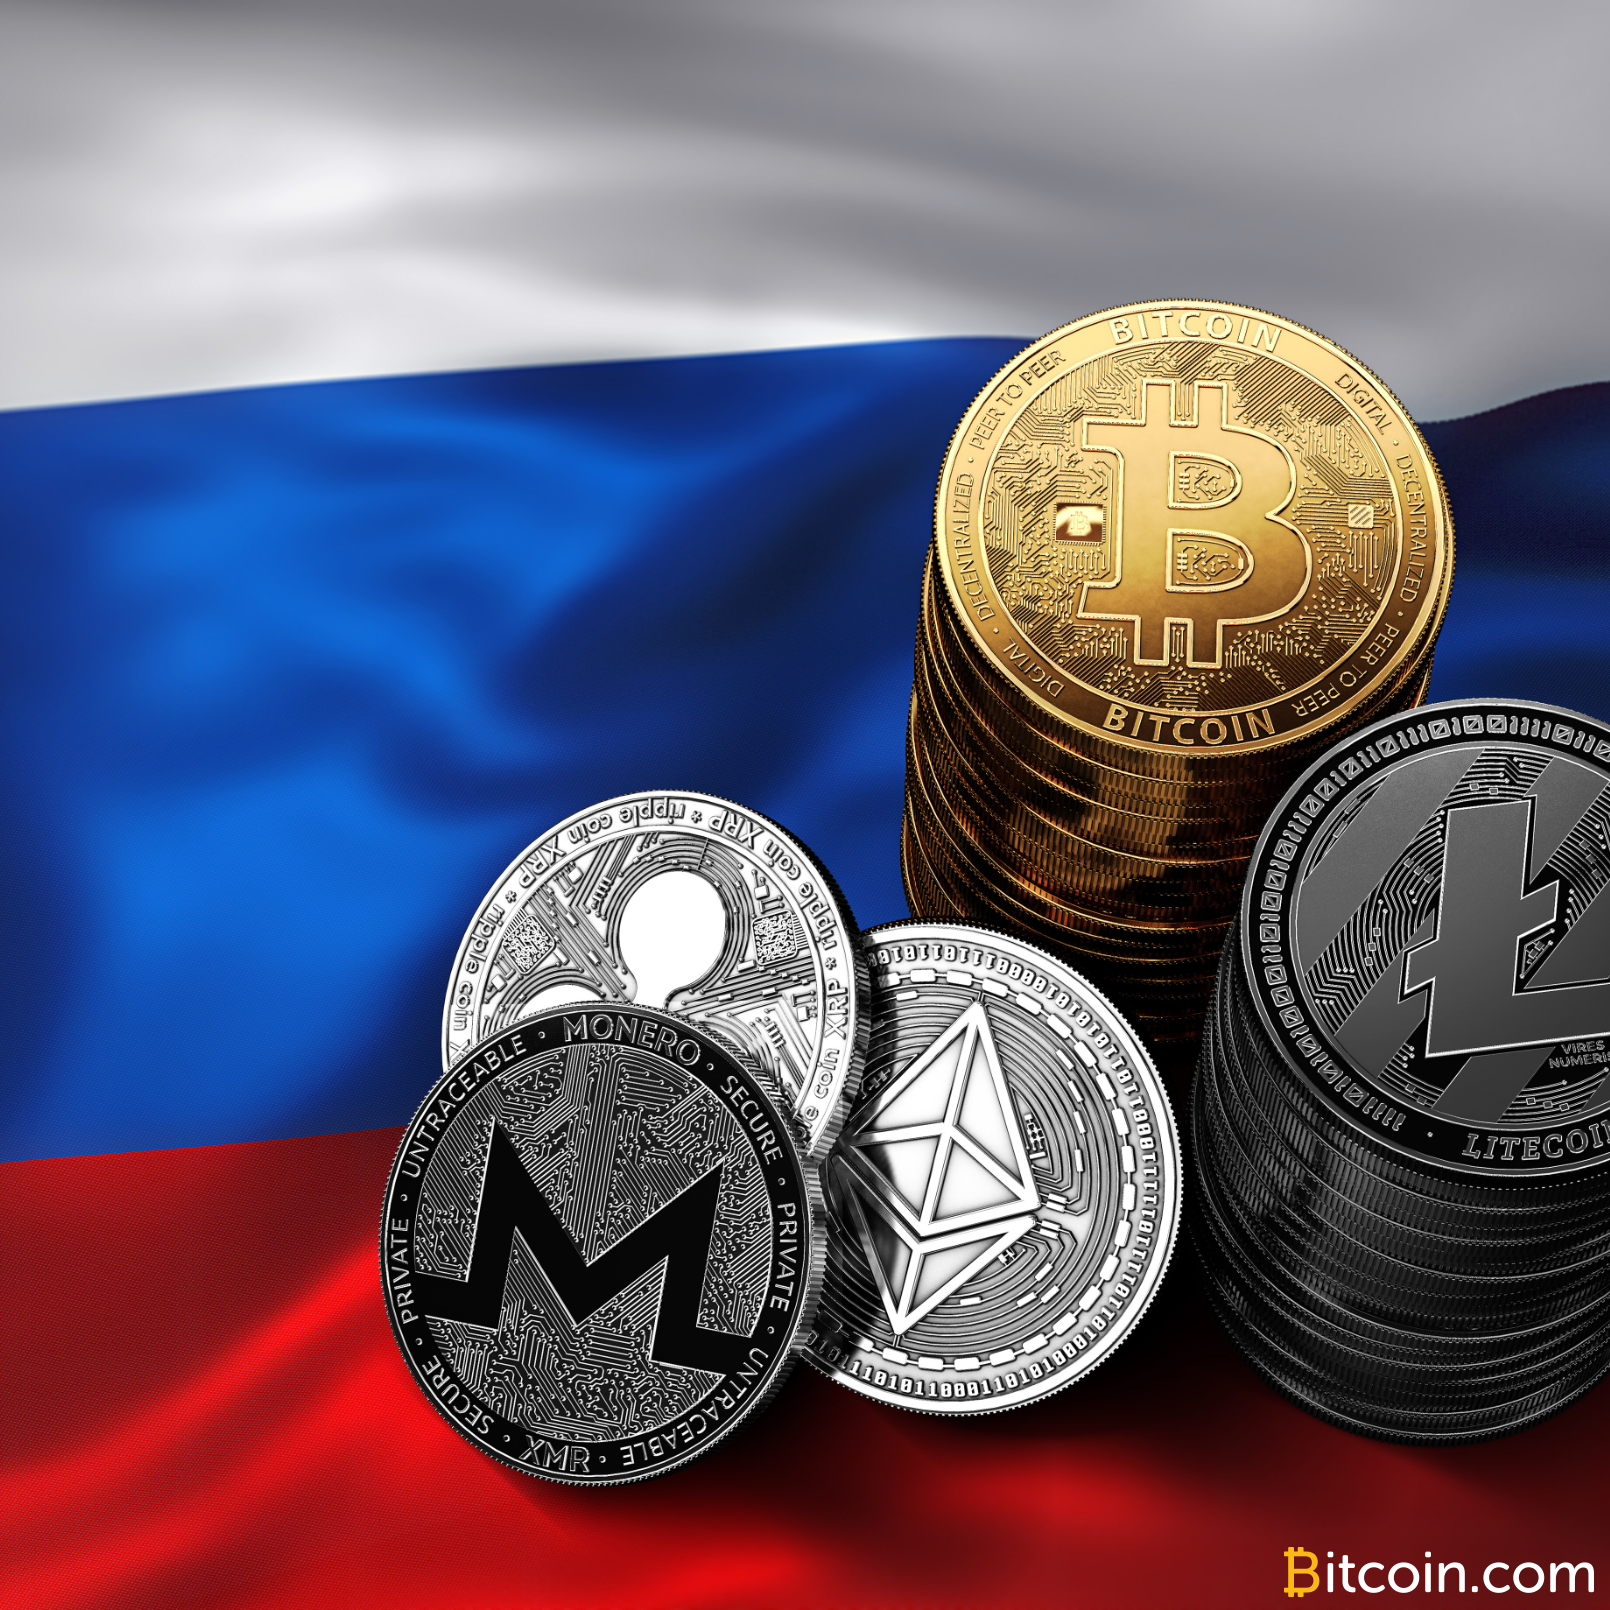 Russian Lawmaker Proposes Legalization of Cryptocurrencies to Attract Investments